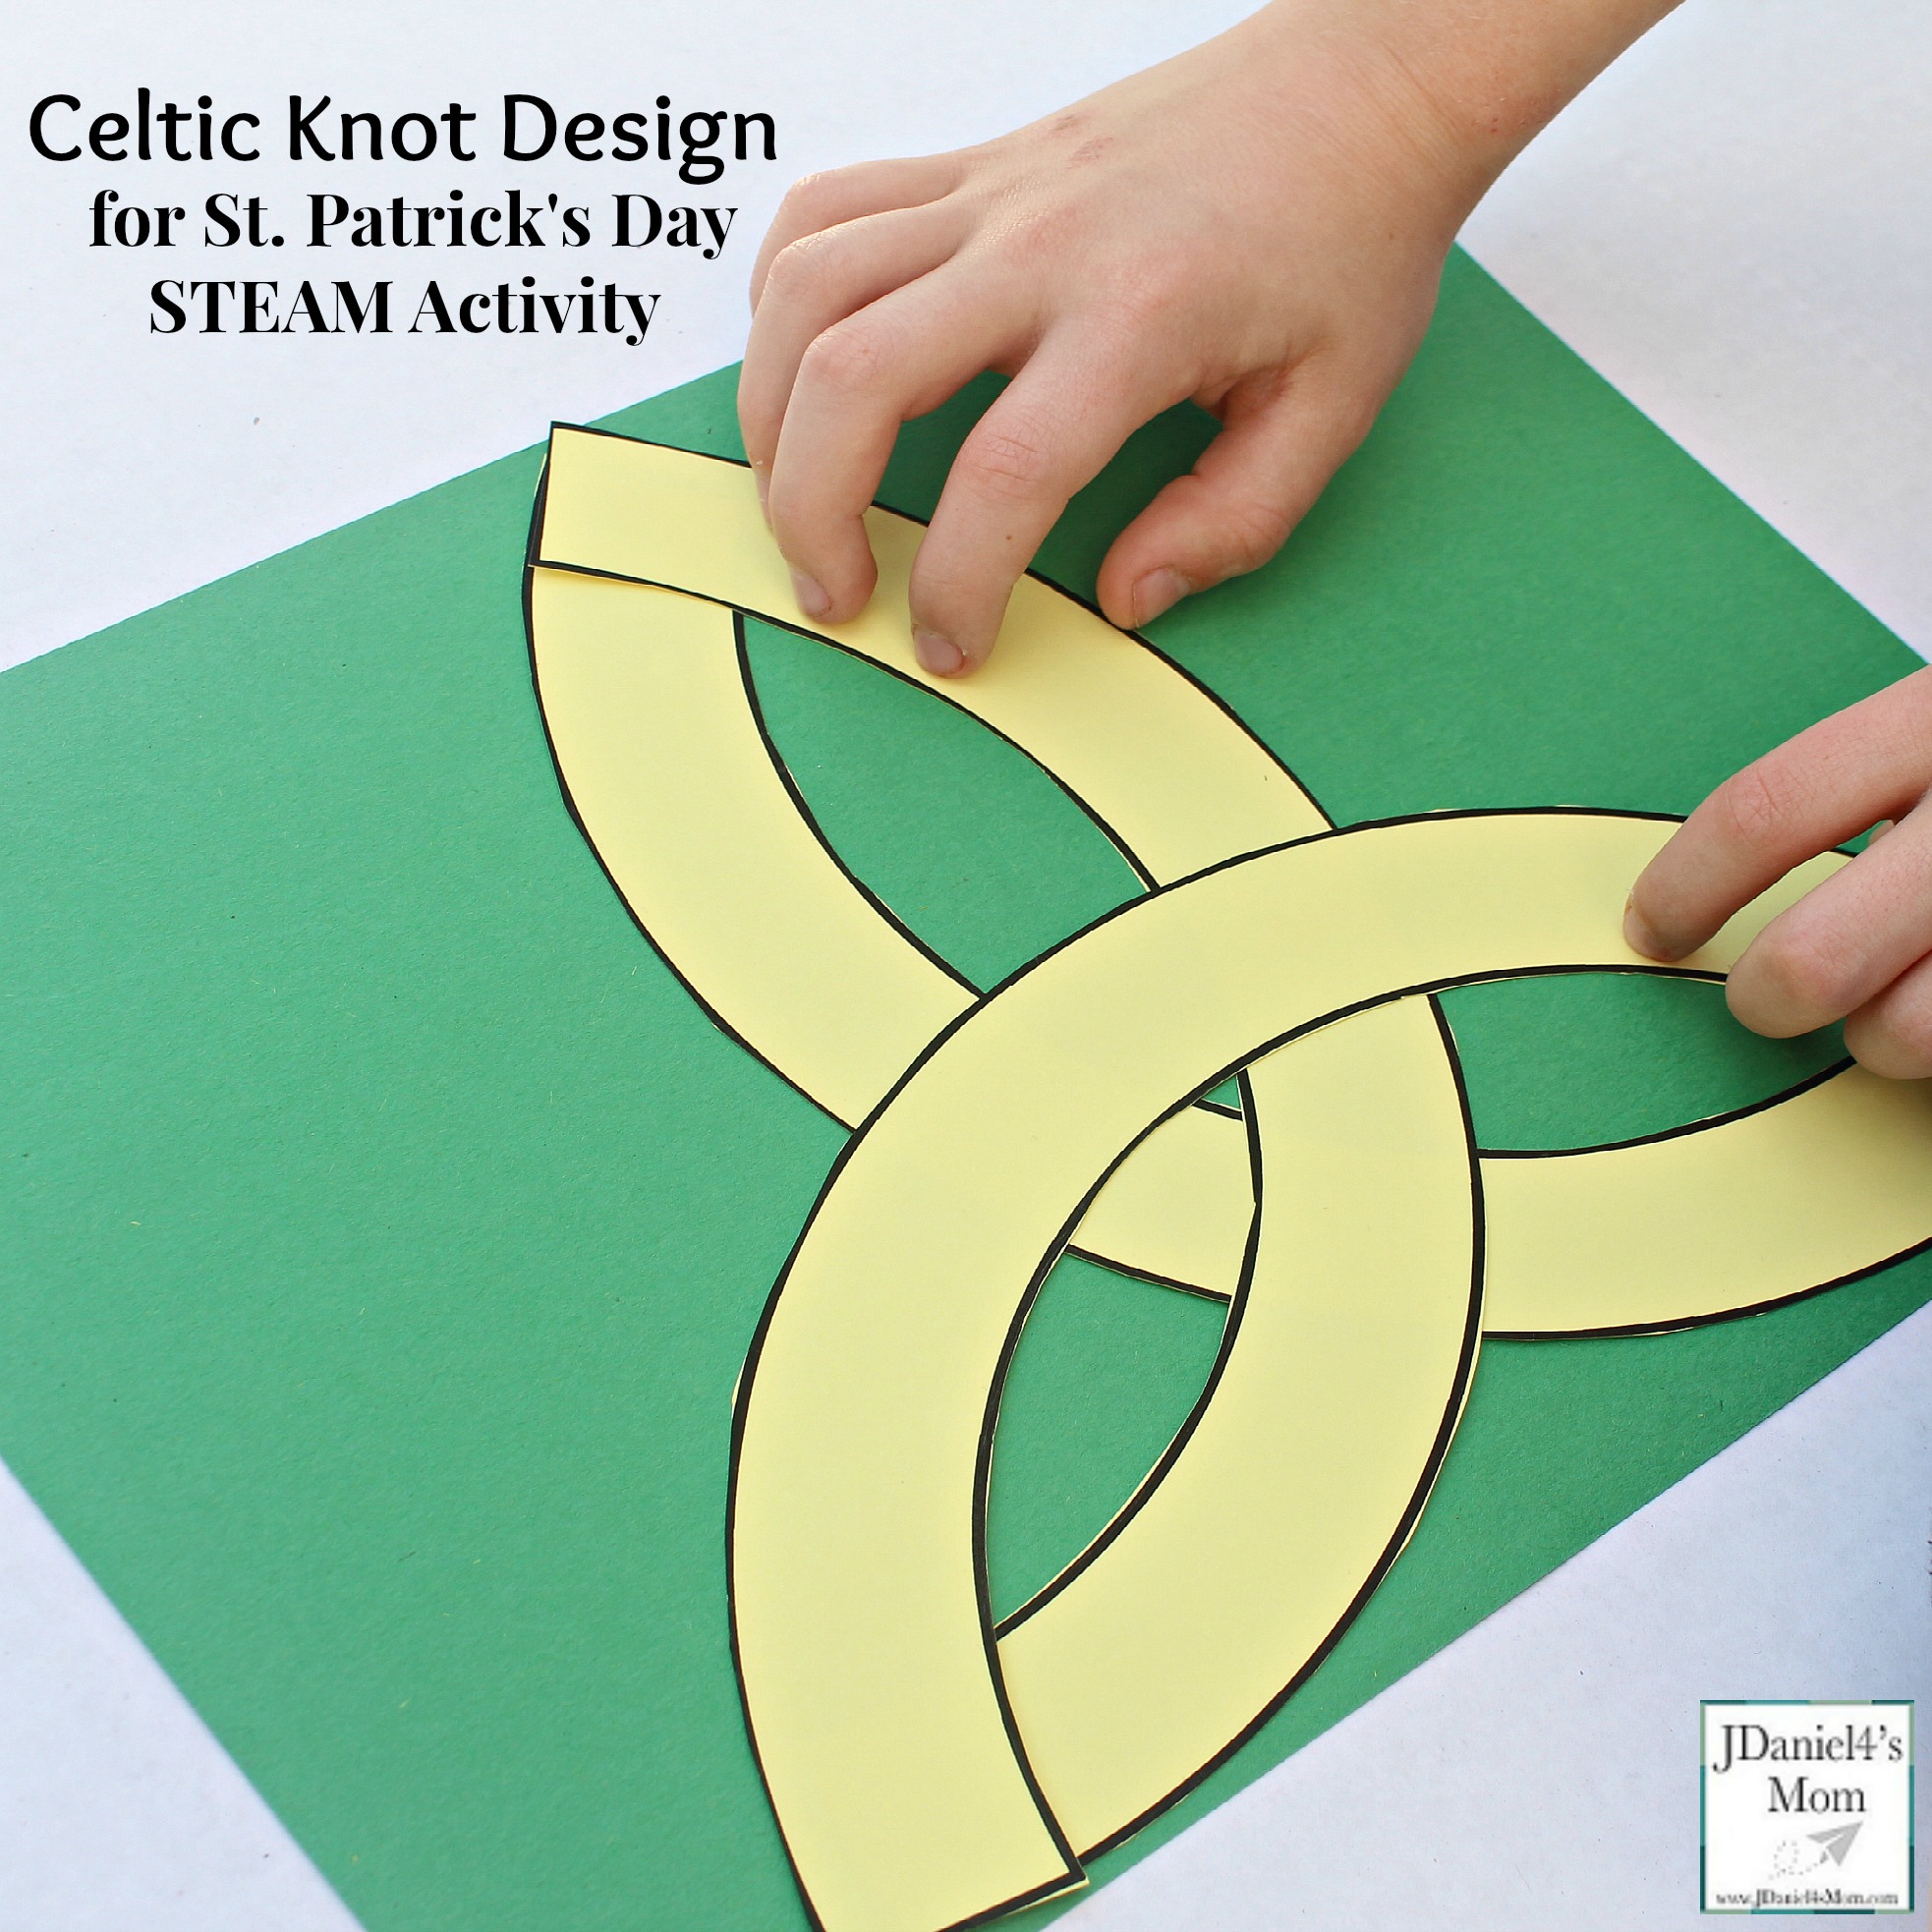 STEAM Activity Celtic Knot Design for St. Patrick's Day